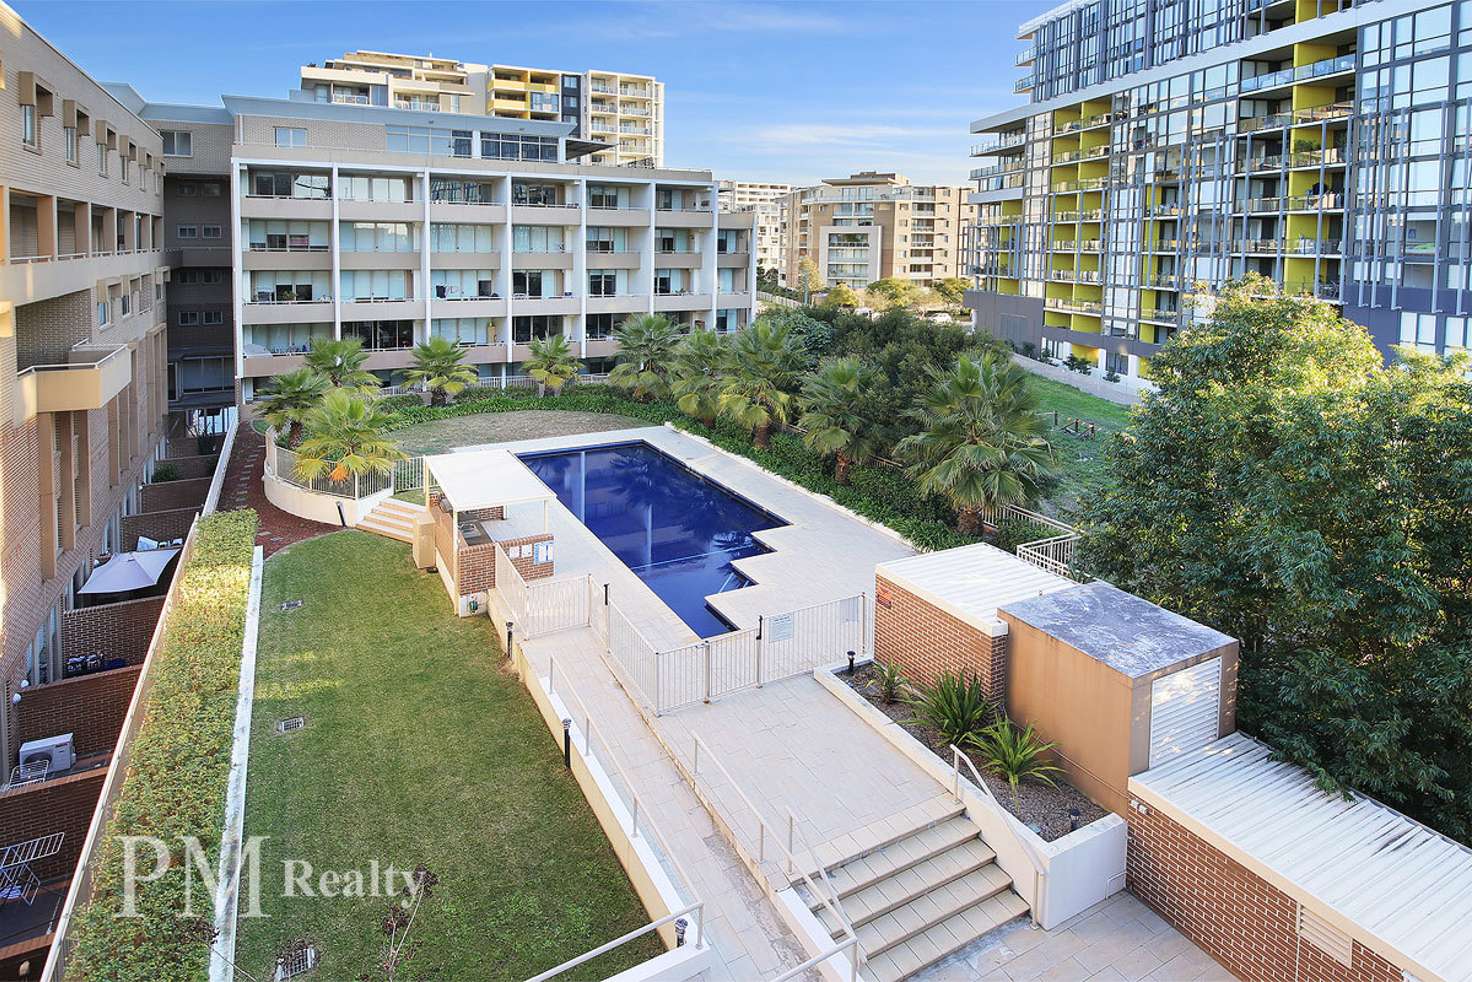 Main view of Homely apartment listing, 98/109-123 O'Riordan St, Mascot NSW 2020